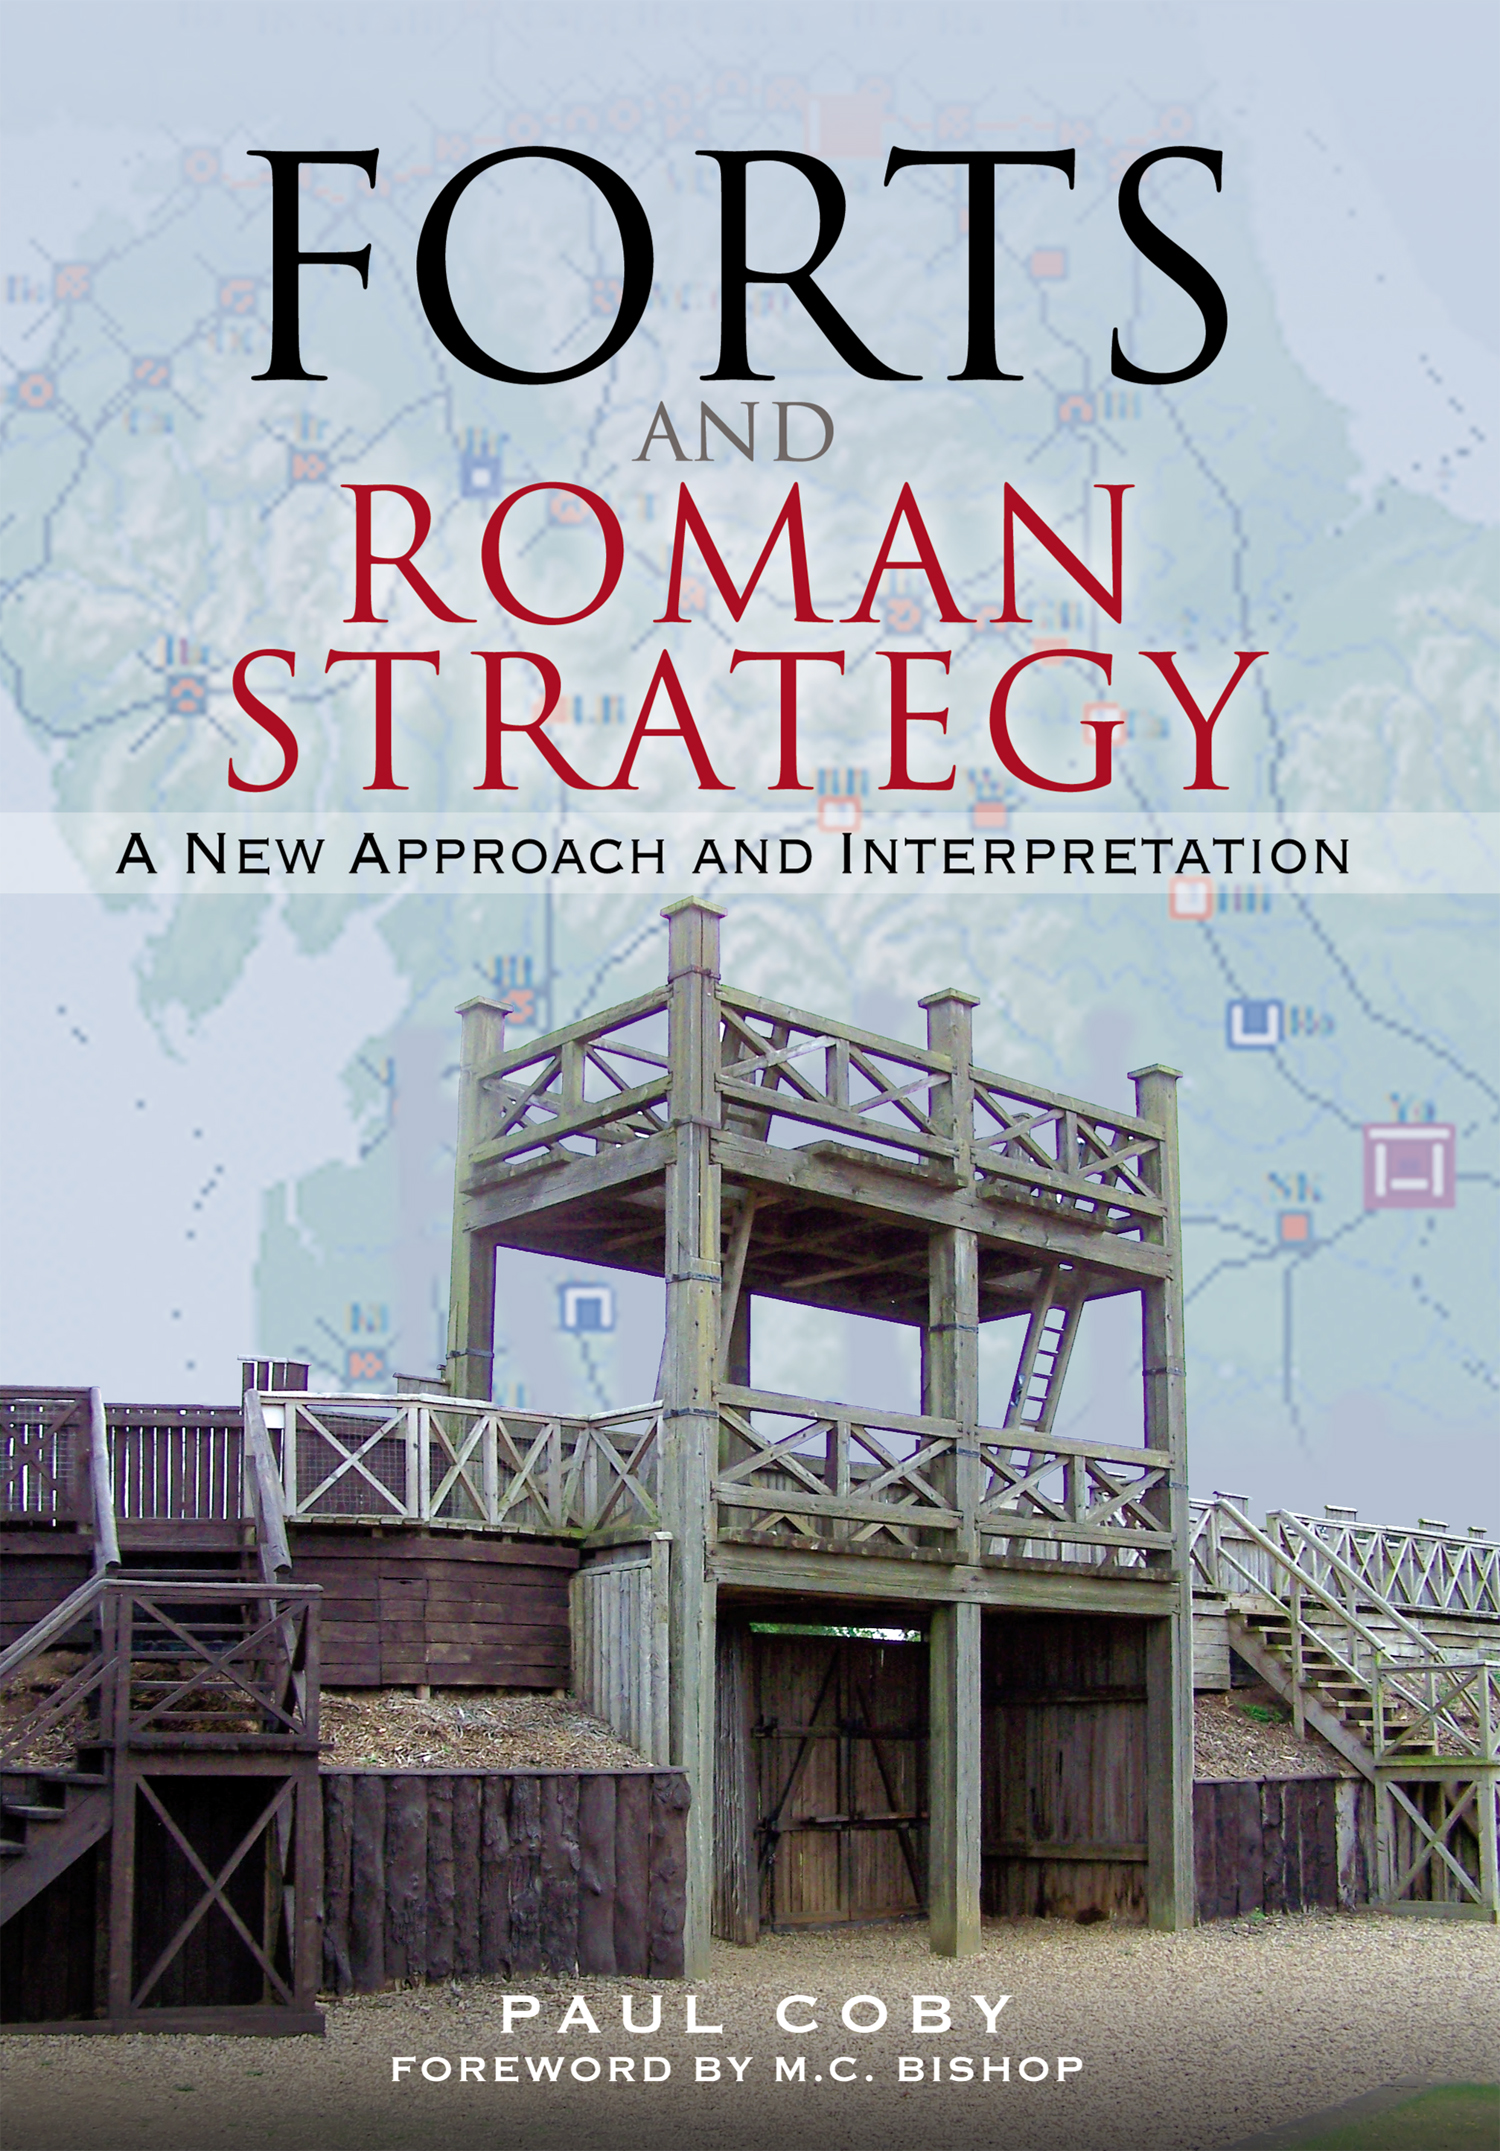 Forts and Roman Strategy